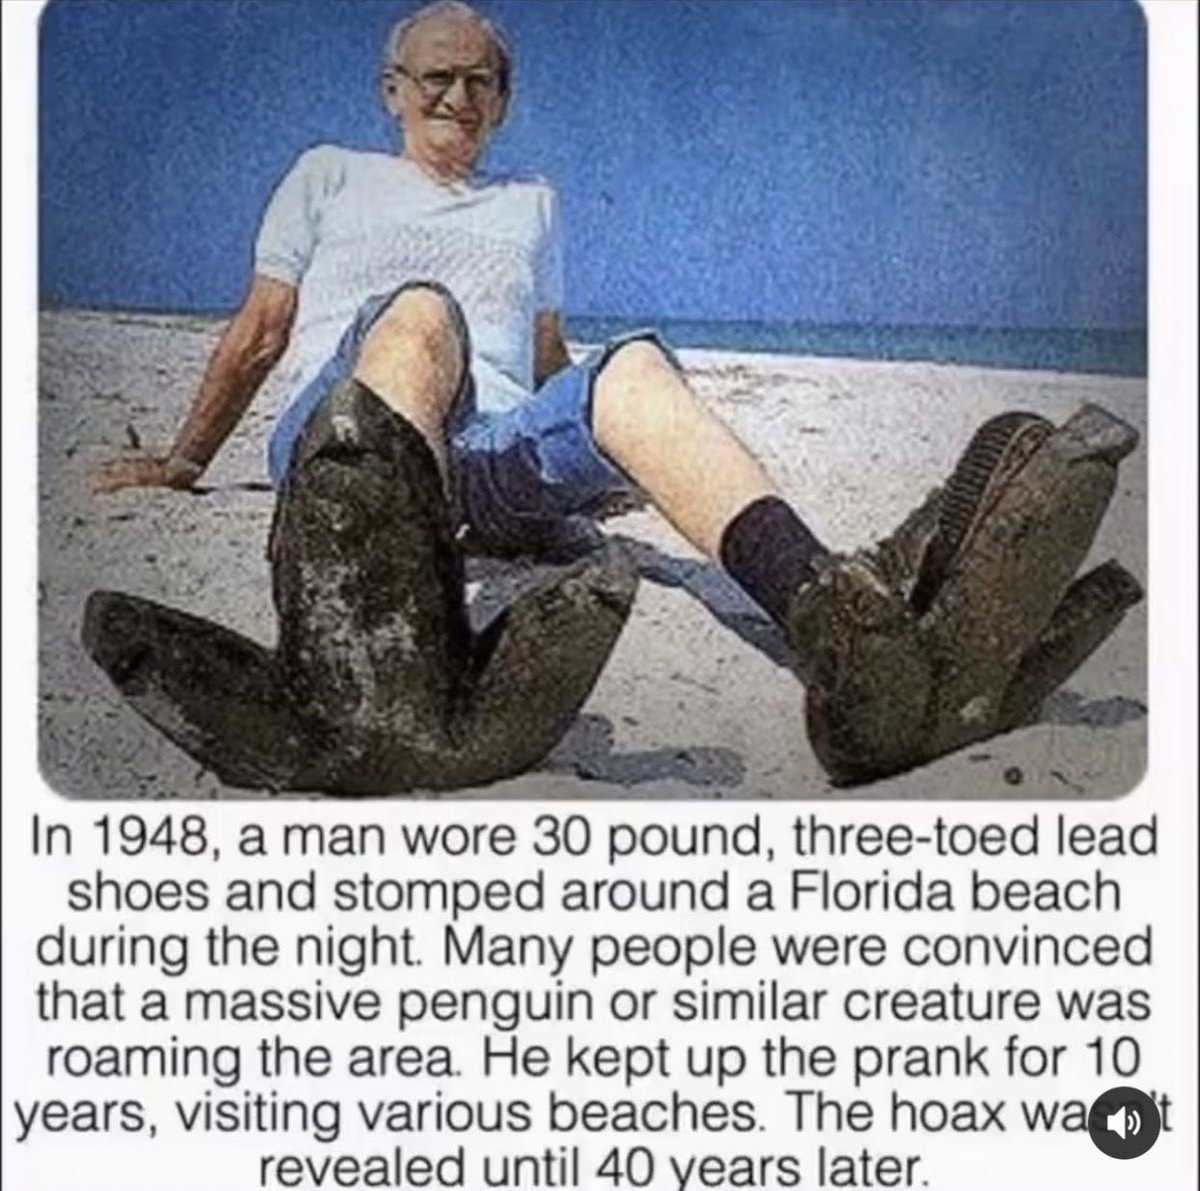 dudes post wins - Giant penguin hoax - In 1948, a man wore 30 pound, threetoed lead shoes and stomped around a Florida beach during the night. Many people were convinced that a massive penguin or similar creature was roaming the area. He kept up the prank